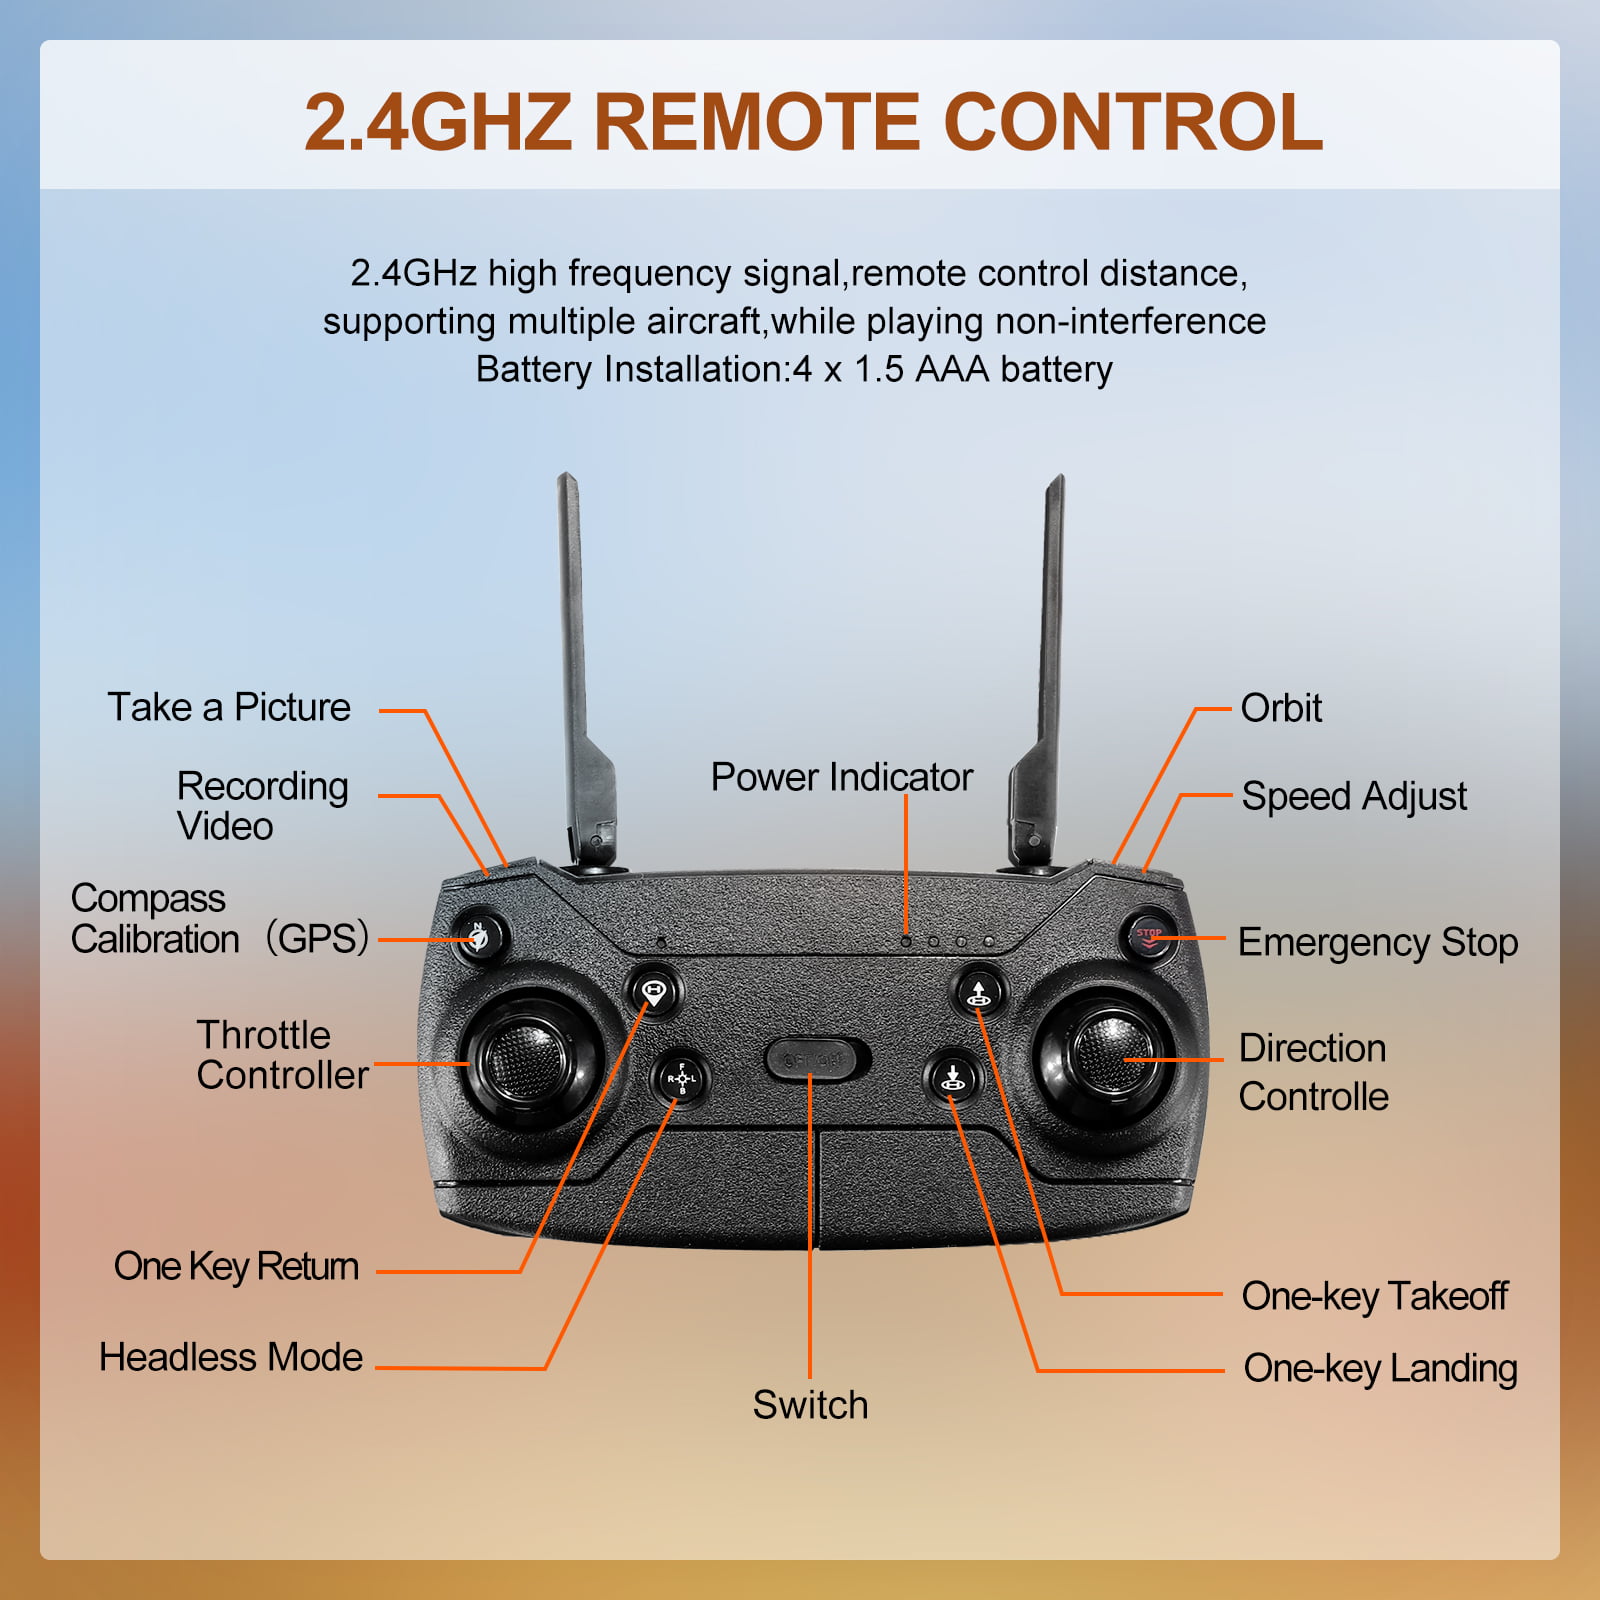 EACHINE E520S GPS Drones for Adults, 5G WIFI FPV Drones with Camera 4K, Follow Me, Waypoint Flight Mode, Foldable Drones Kids Men Gift Walmart.com